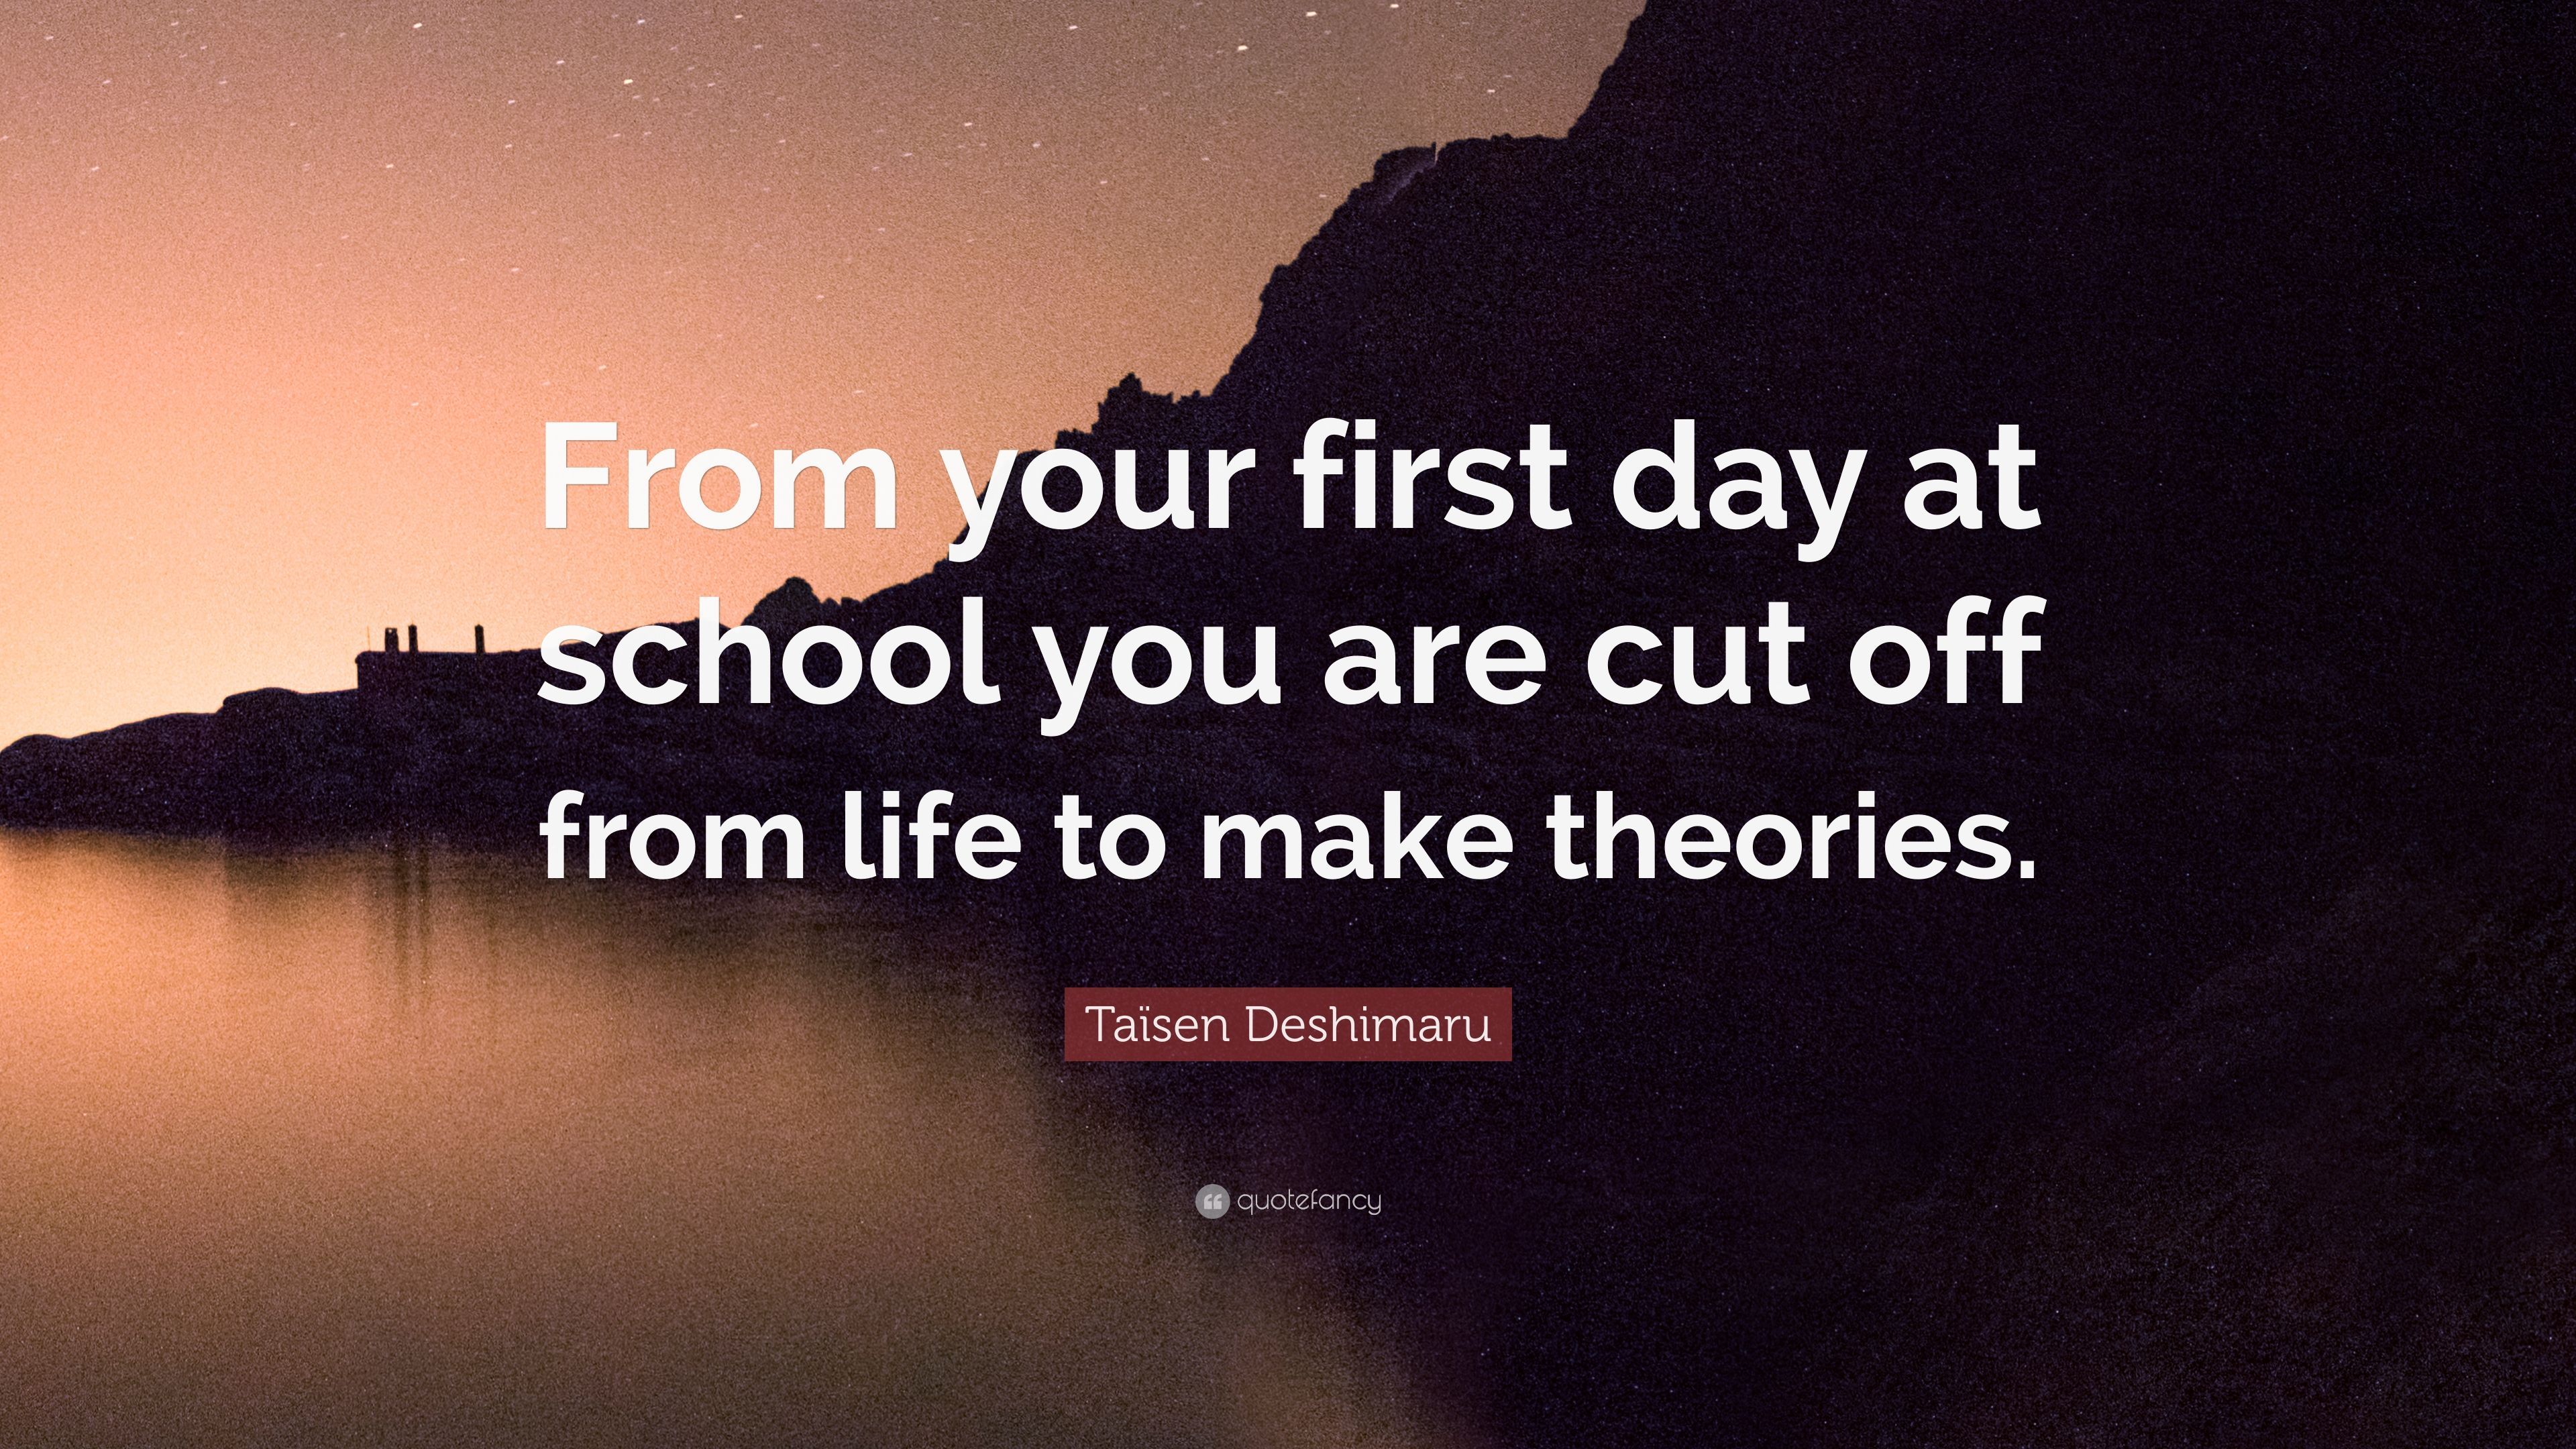 Taïsen Deshimaru Quote: “From your first day at school you are cut